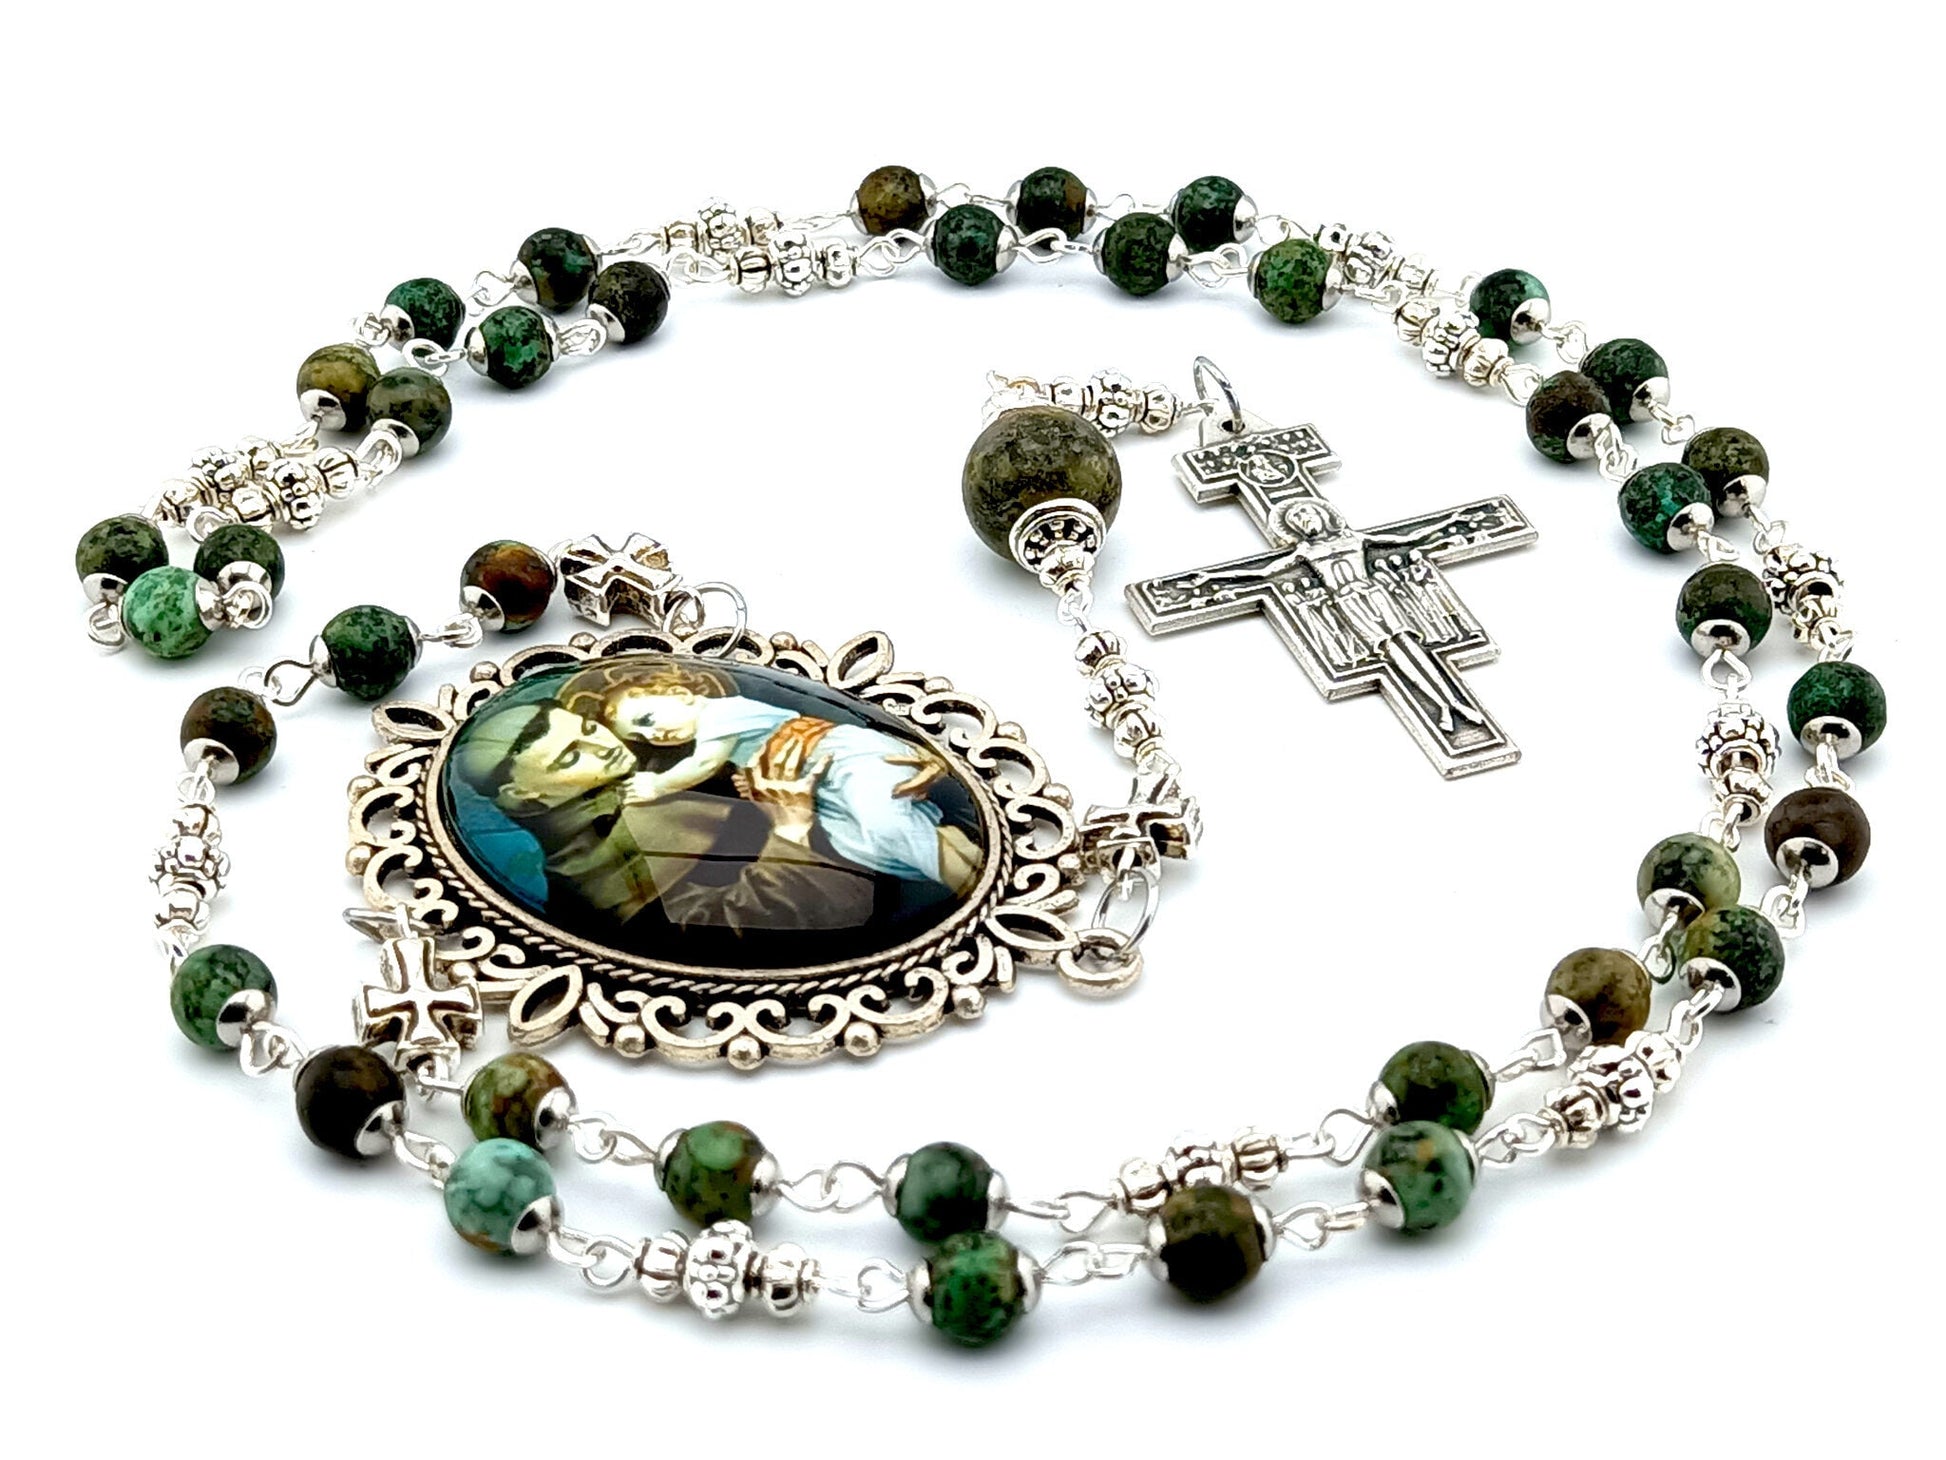 Saint Anthony of Padua unique rosary beads prayer chaplet with green gemstone beads, Saint Dominic crucifix and large picture centre medal.